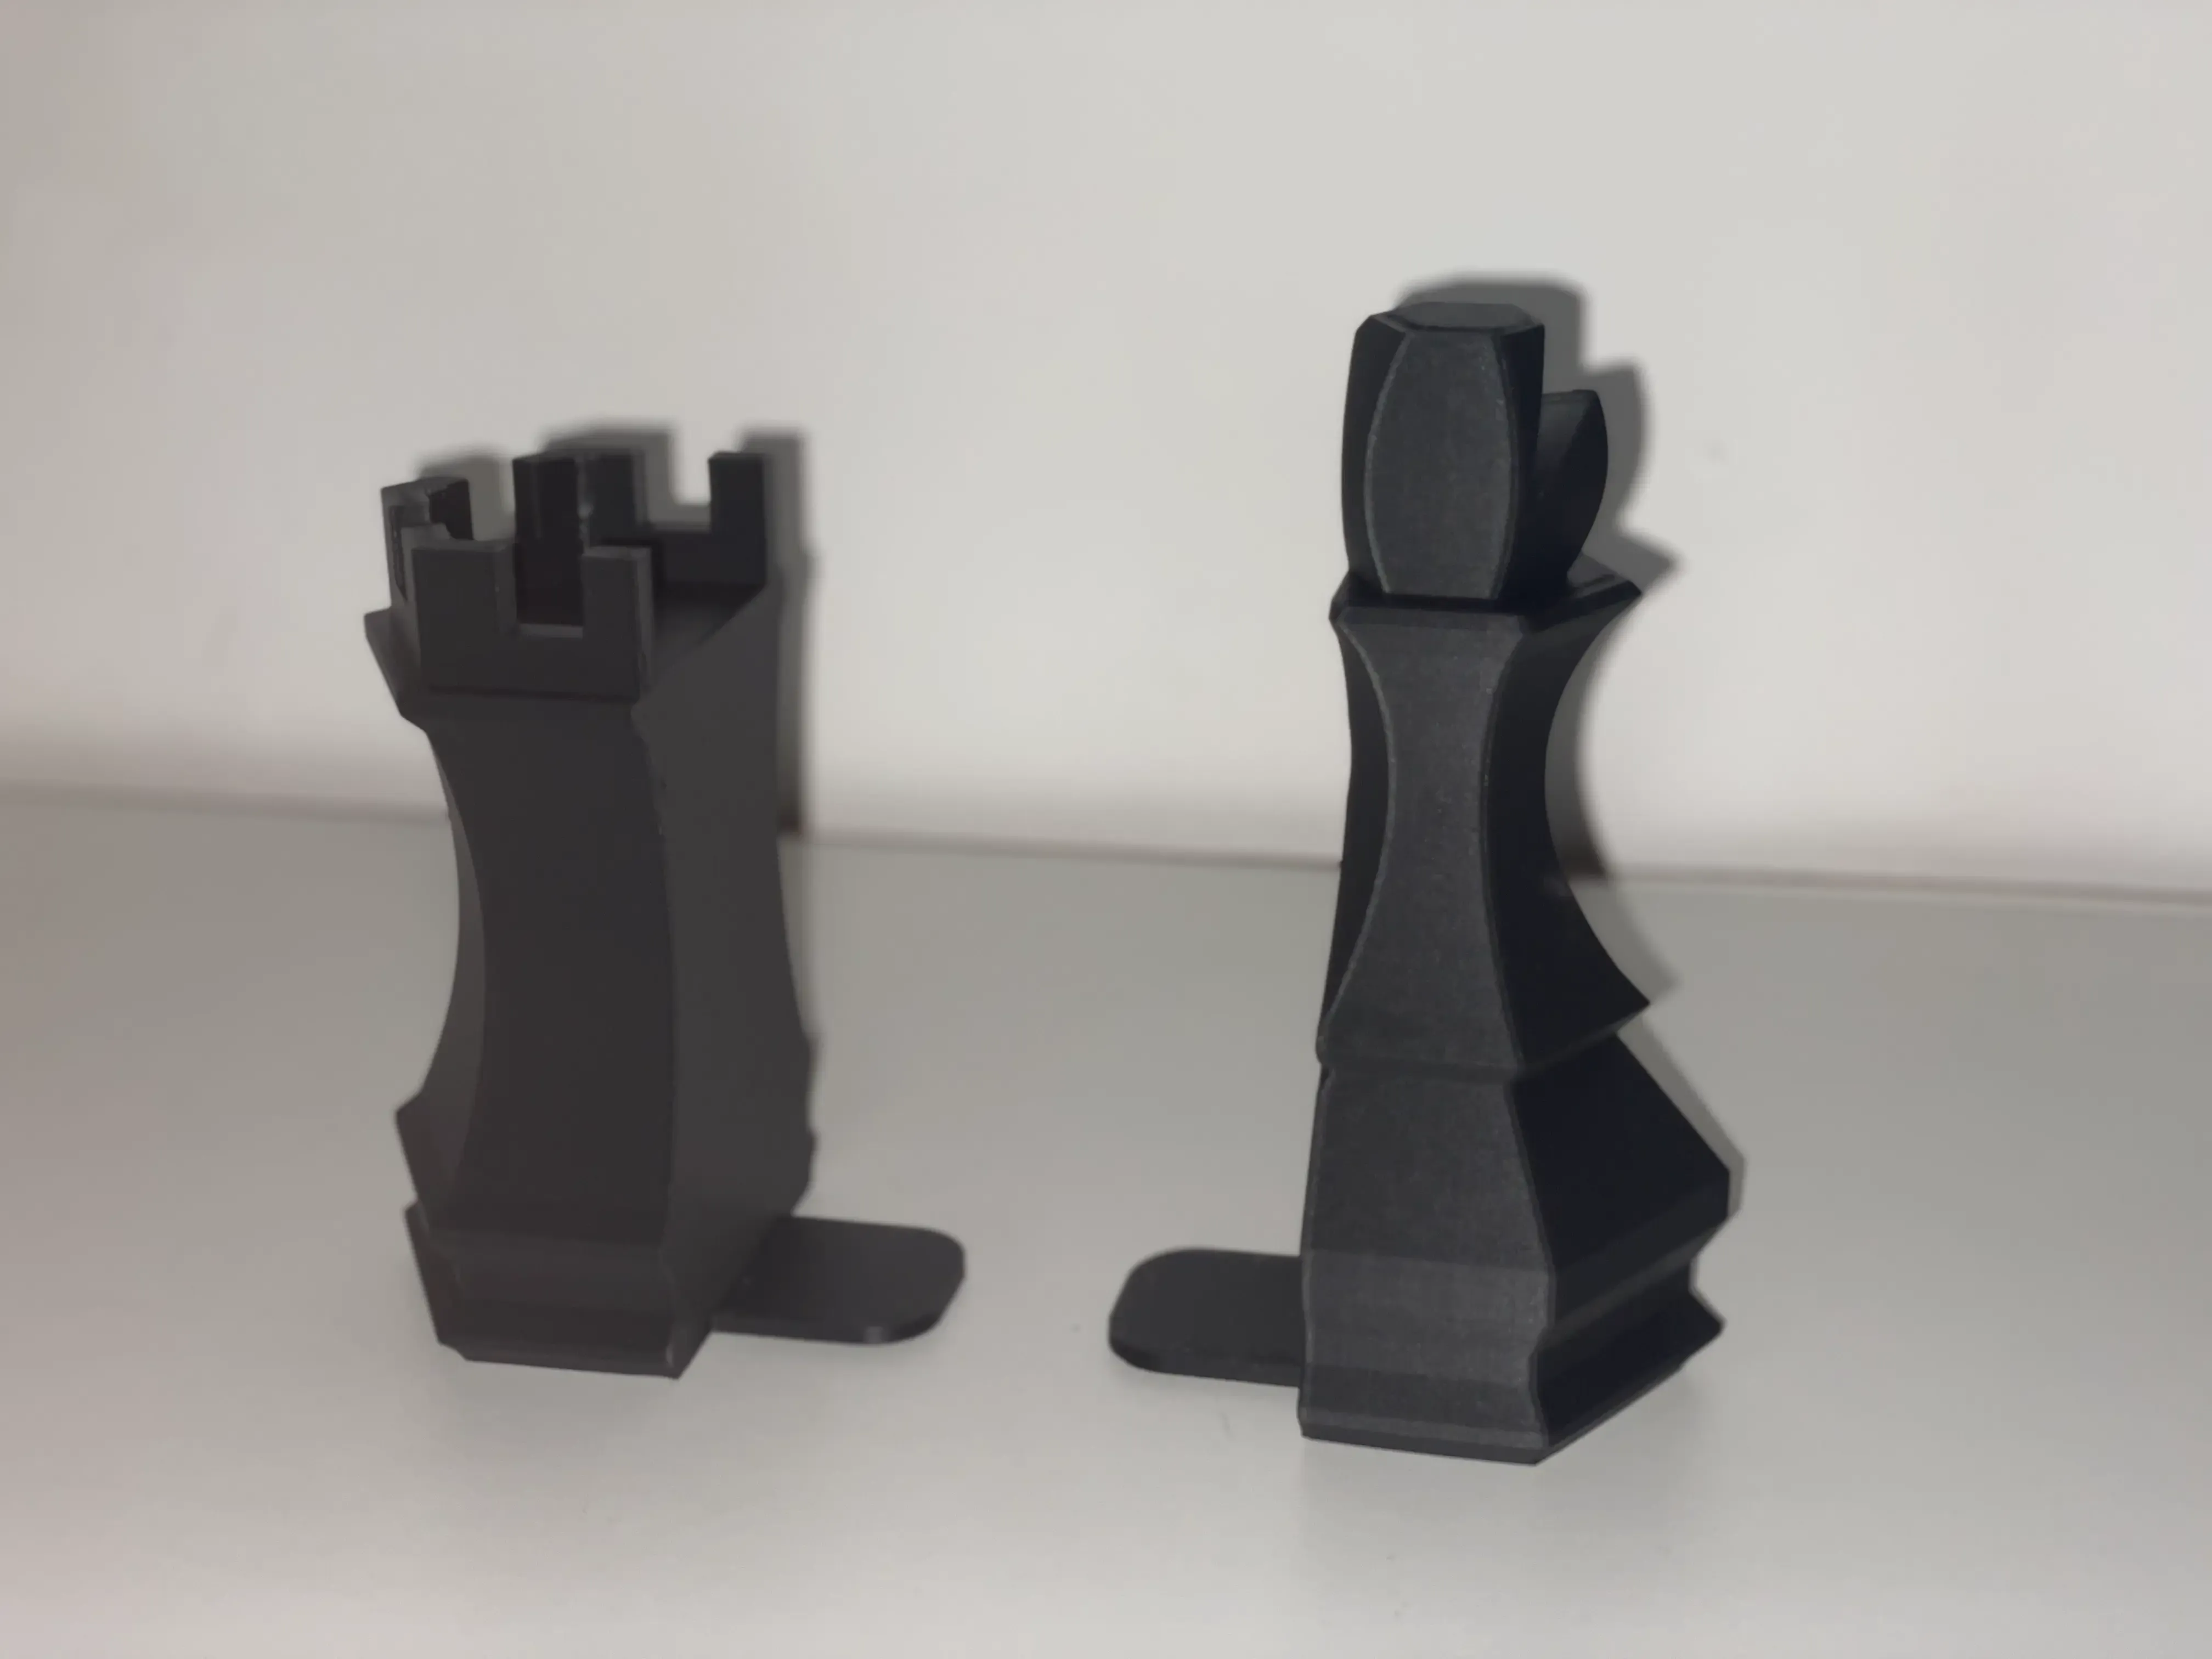 Chess Bookend